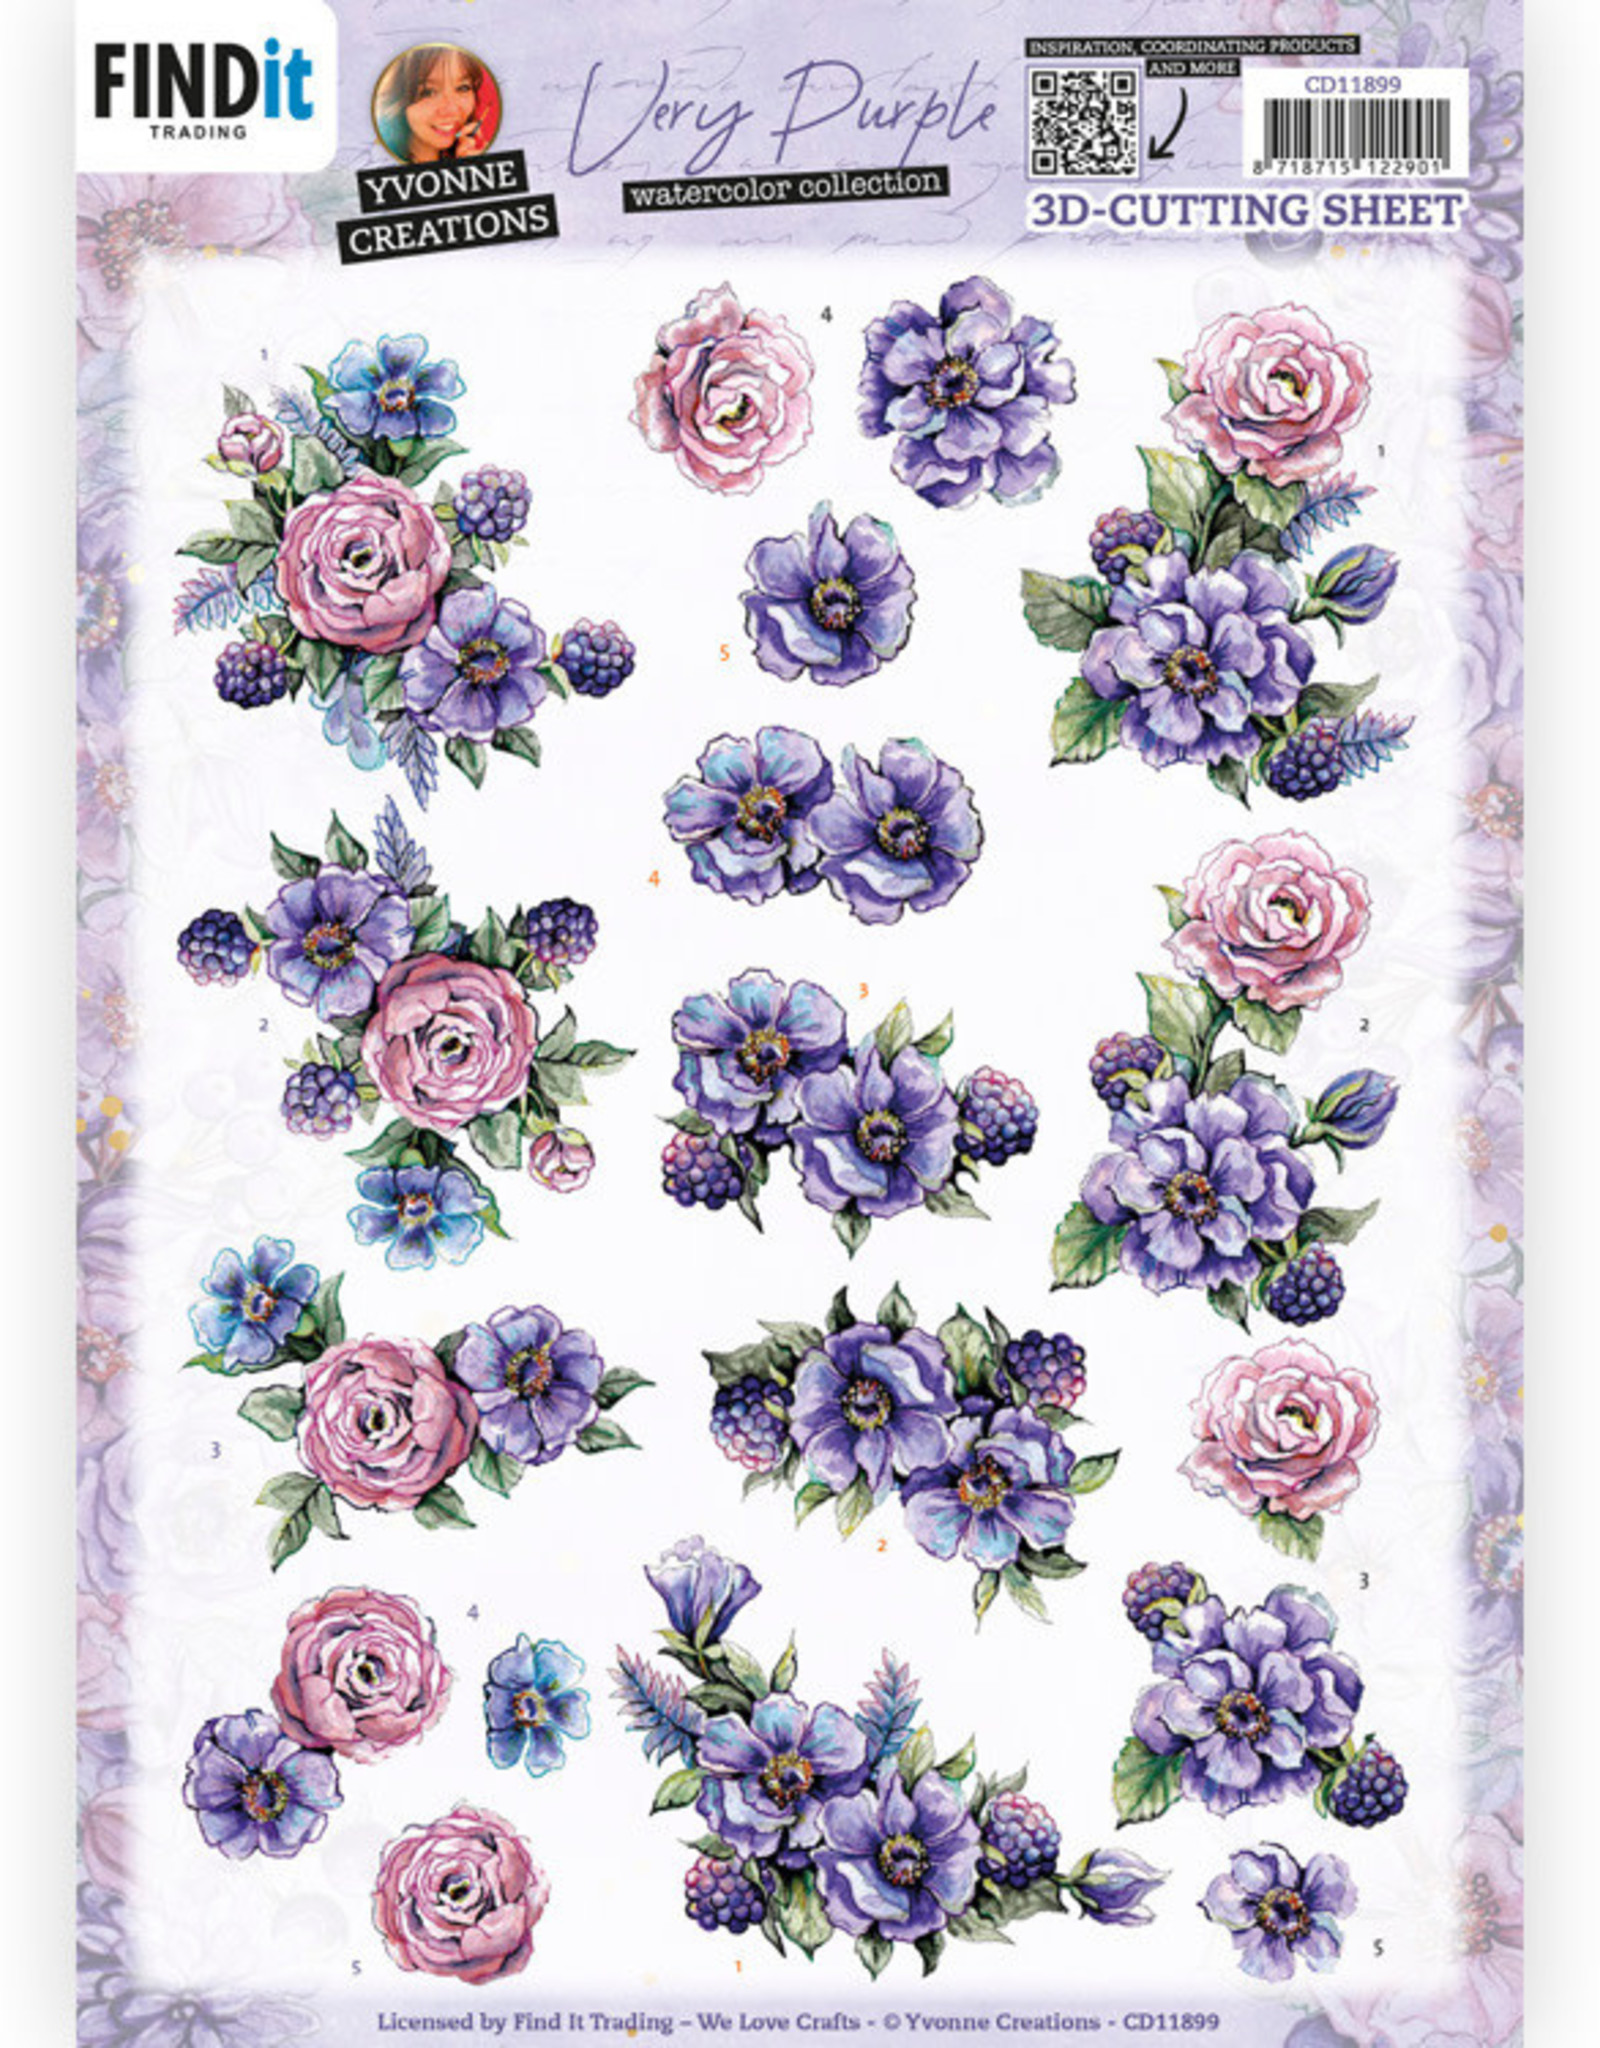 Yvonne Creations 3D Cutting Sheets - Yvonne Creations - Very Purple - Blackberries  CD11899